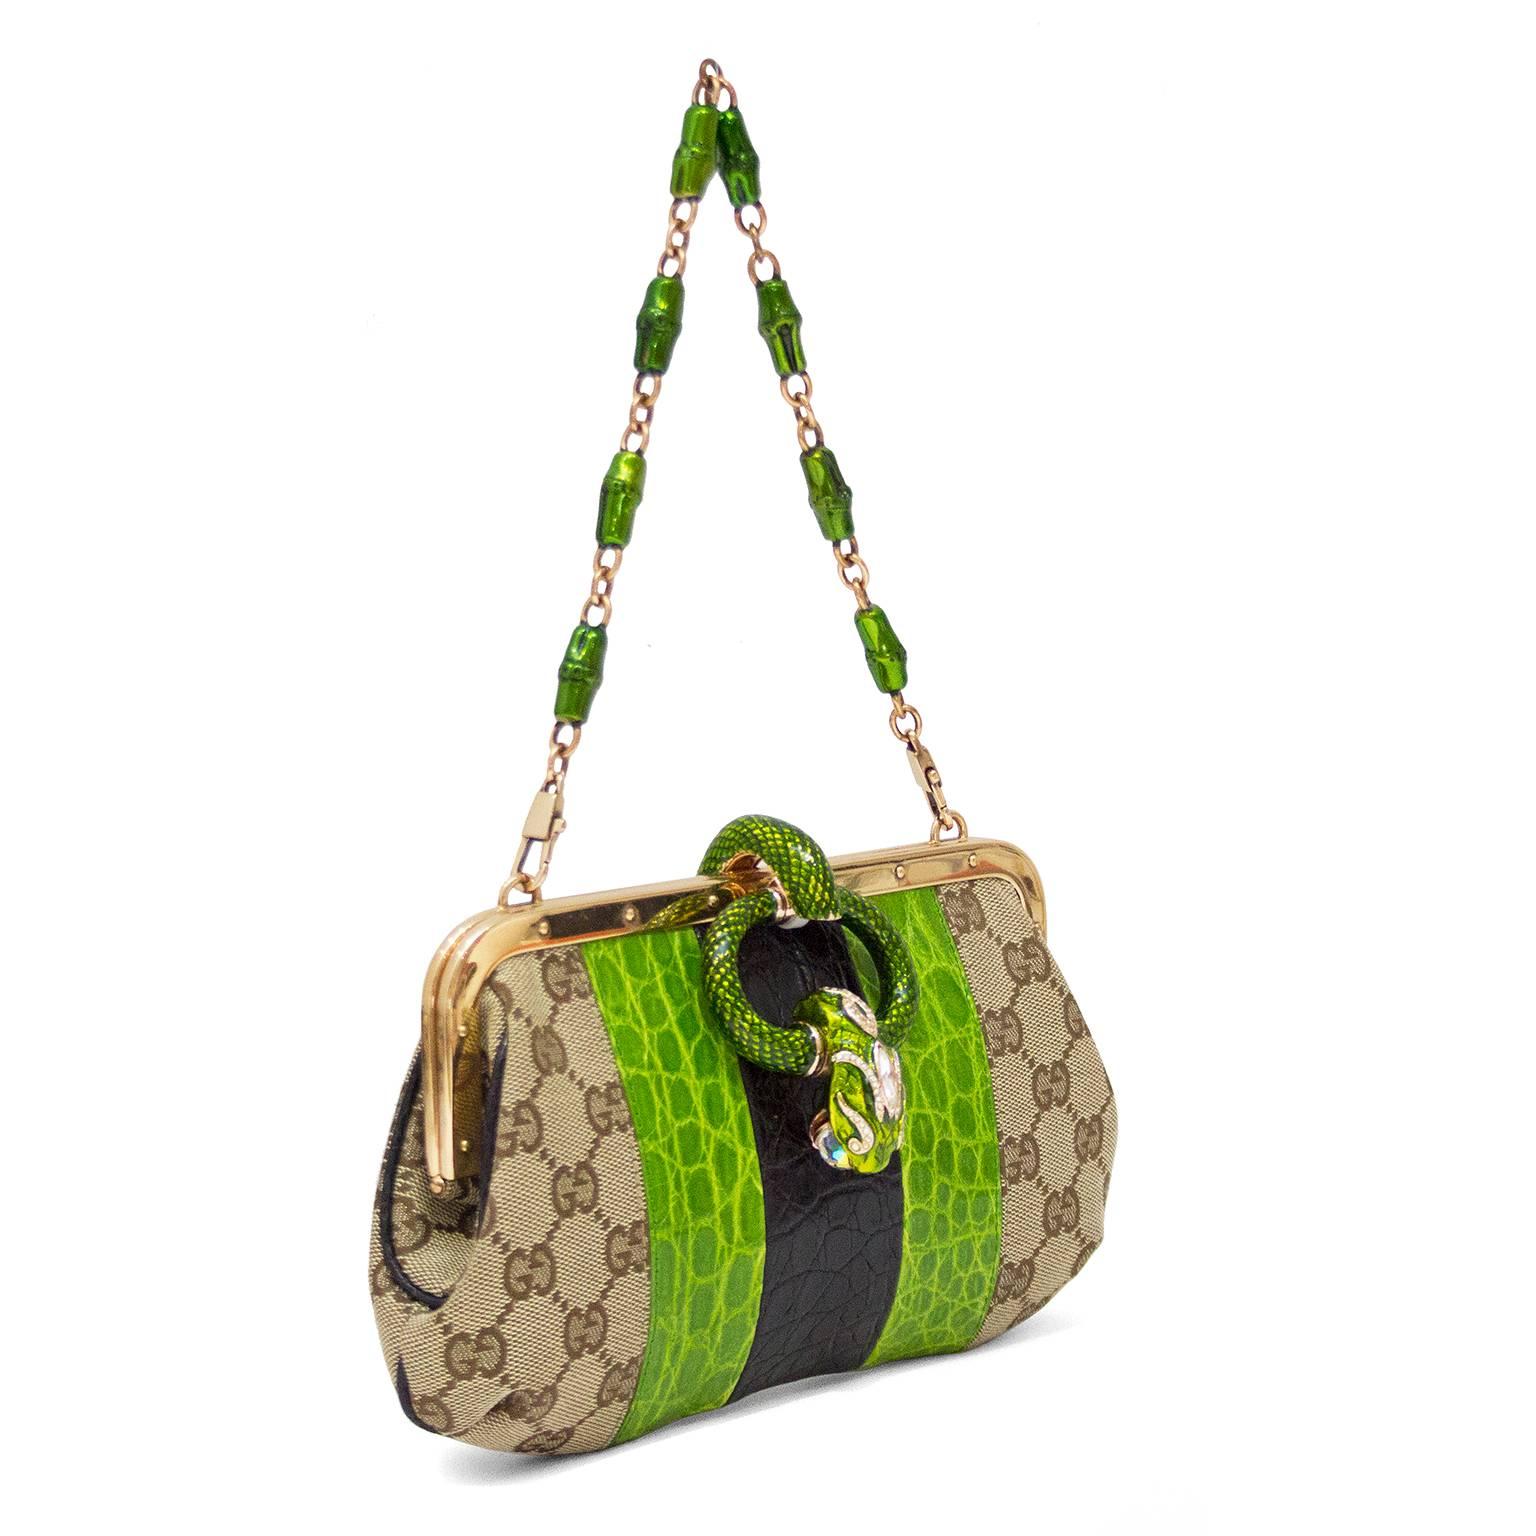 Limited edition evening bag from the Gucci by Tom Ford Spring/Summer 2003 collection. Constructed of panels of the iconic Gucci monogram canvas with black and green crocodile. Rose gold tone hardware with green enamel and metal bamboo shaped accents